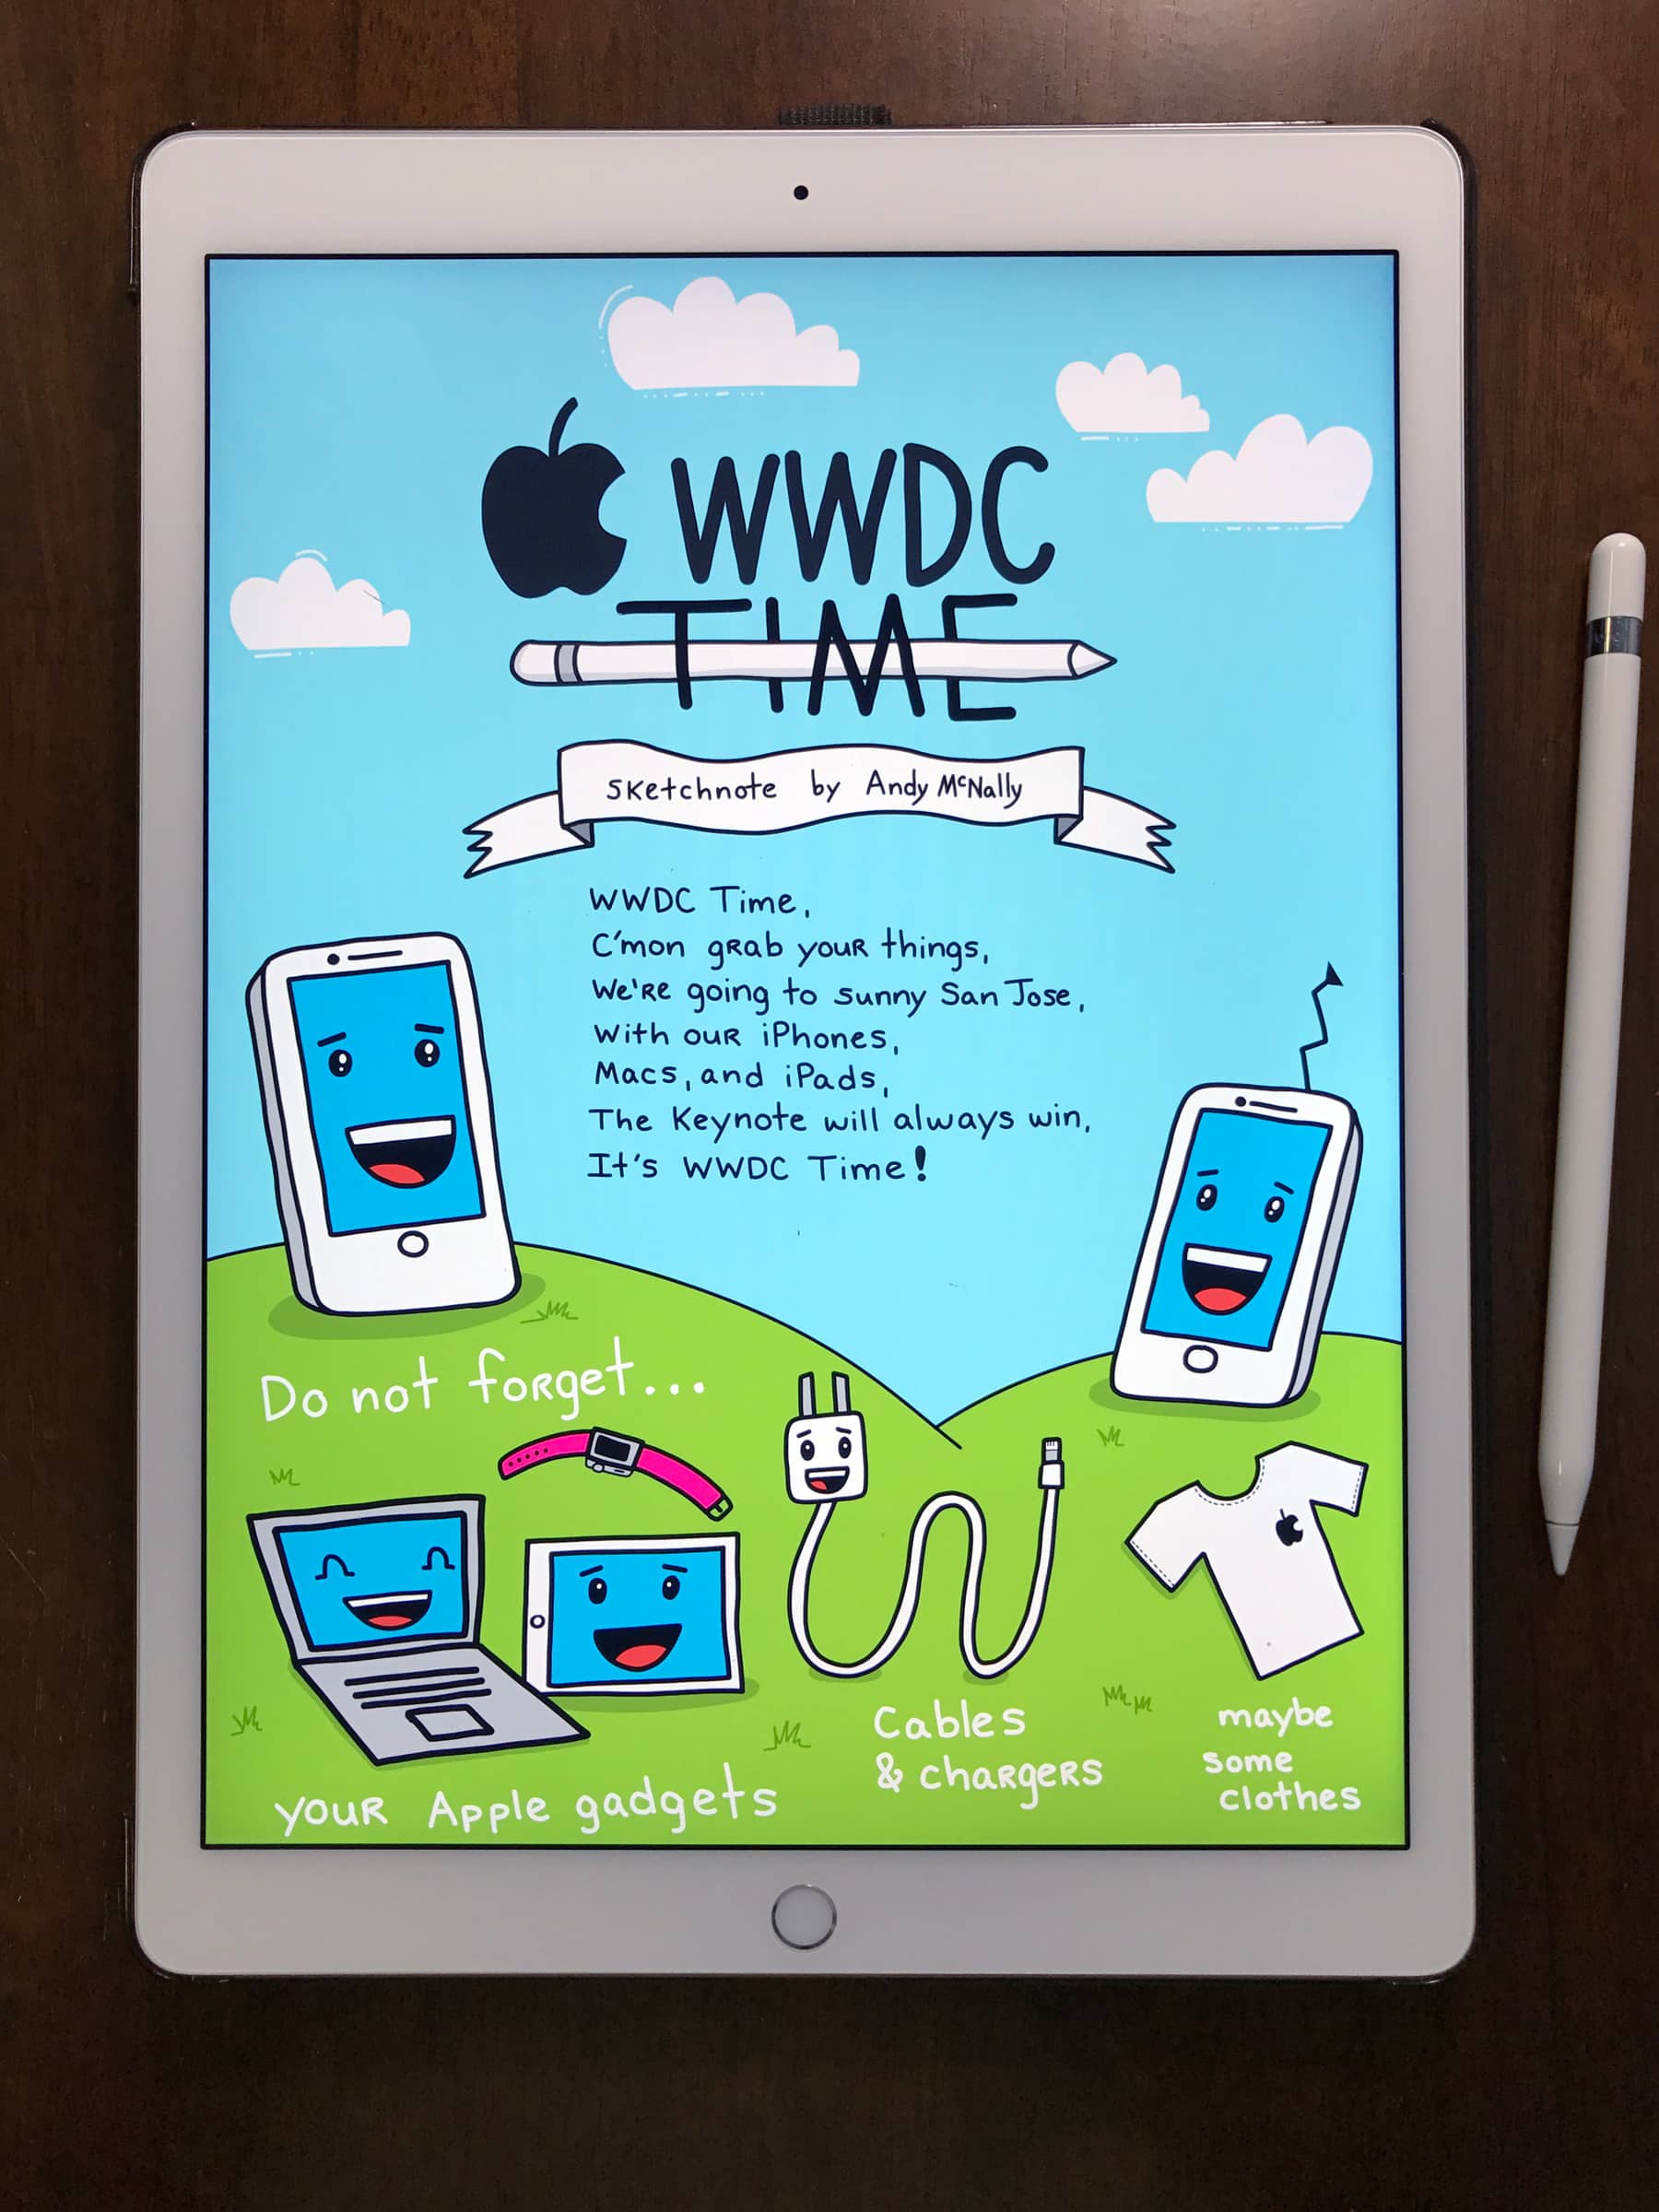 iPad Pro with WWDC Time sketchnote displayed